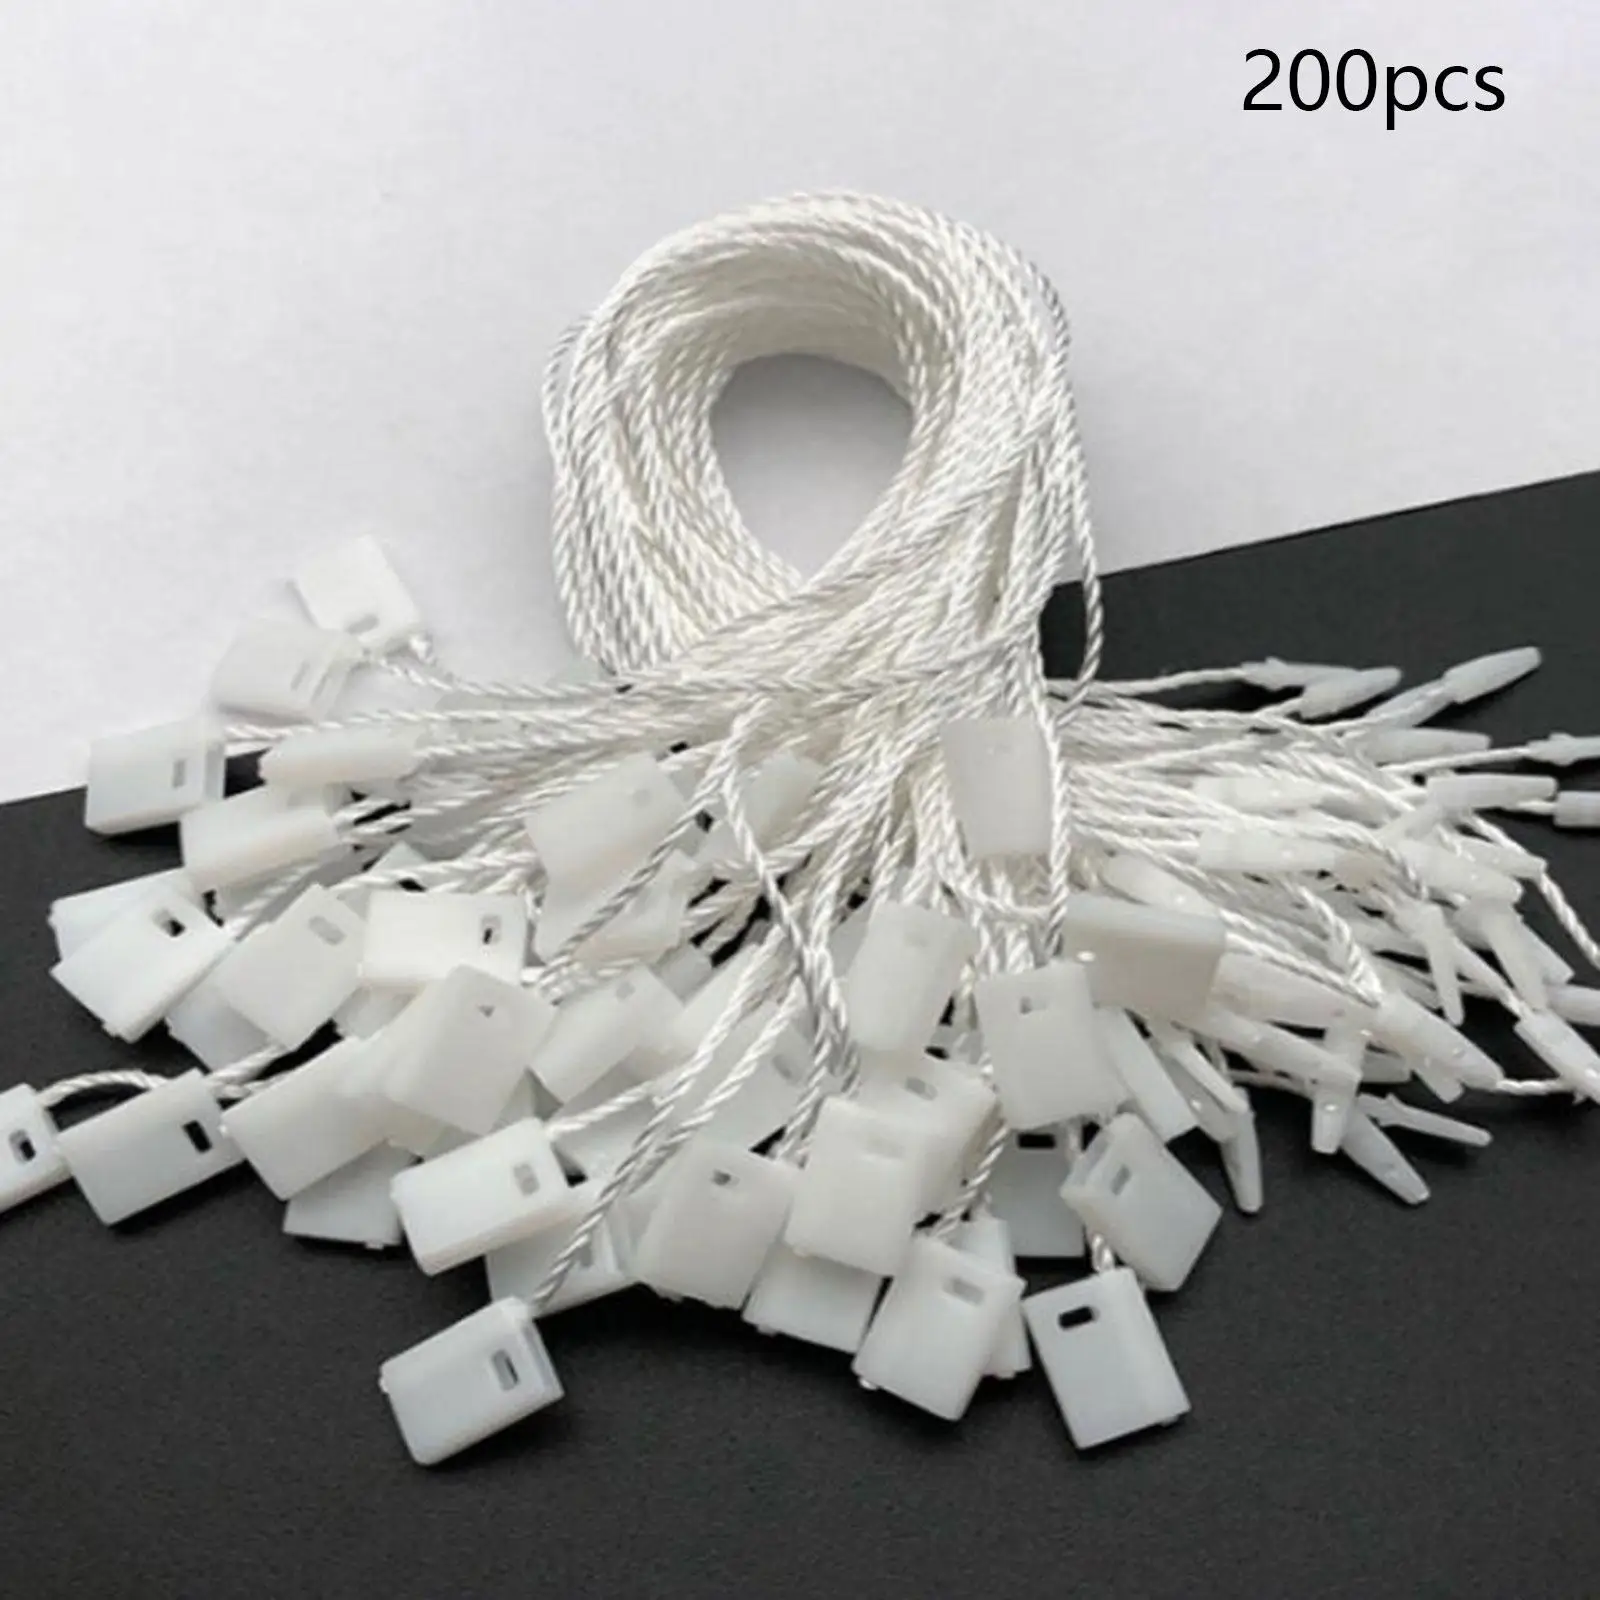 200Pcs Hang Tag Strings Easy to Attach Lightweight Craft Making DIY Tag Hanging Ropes for Gift Bags Luggage Jewelry Belt Purse